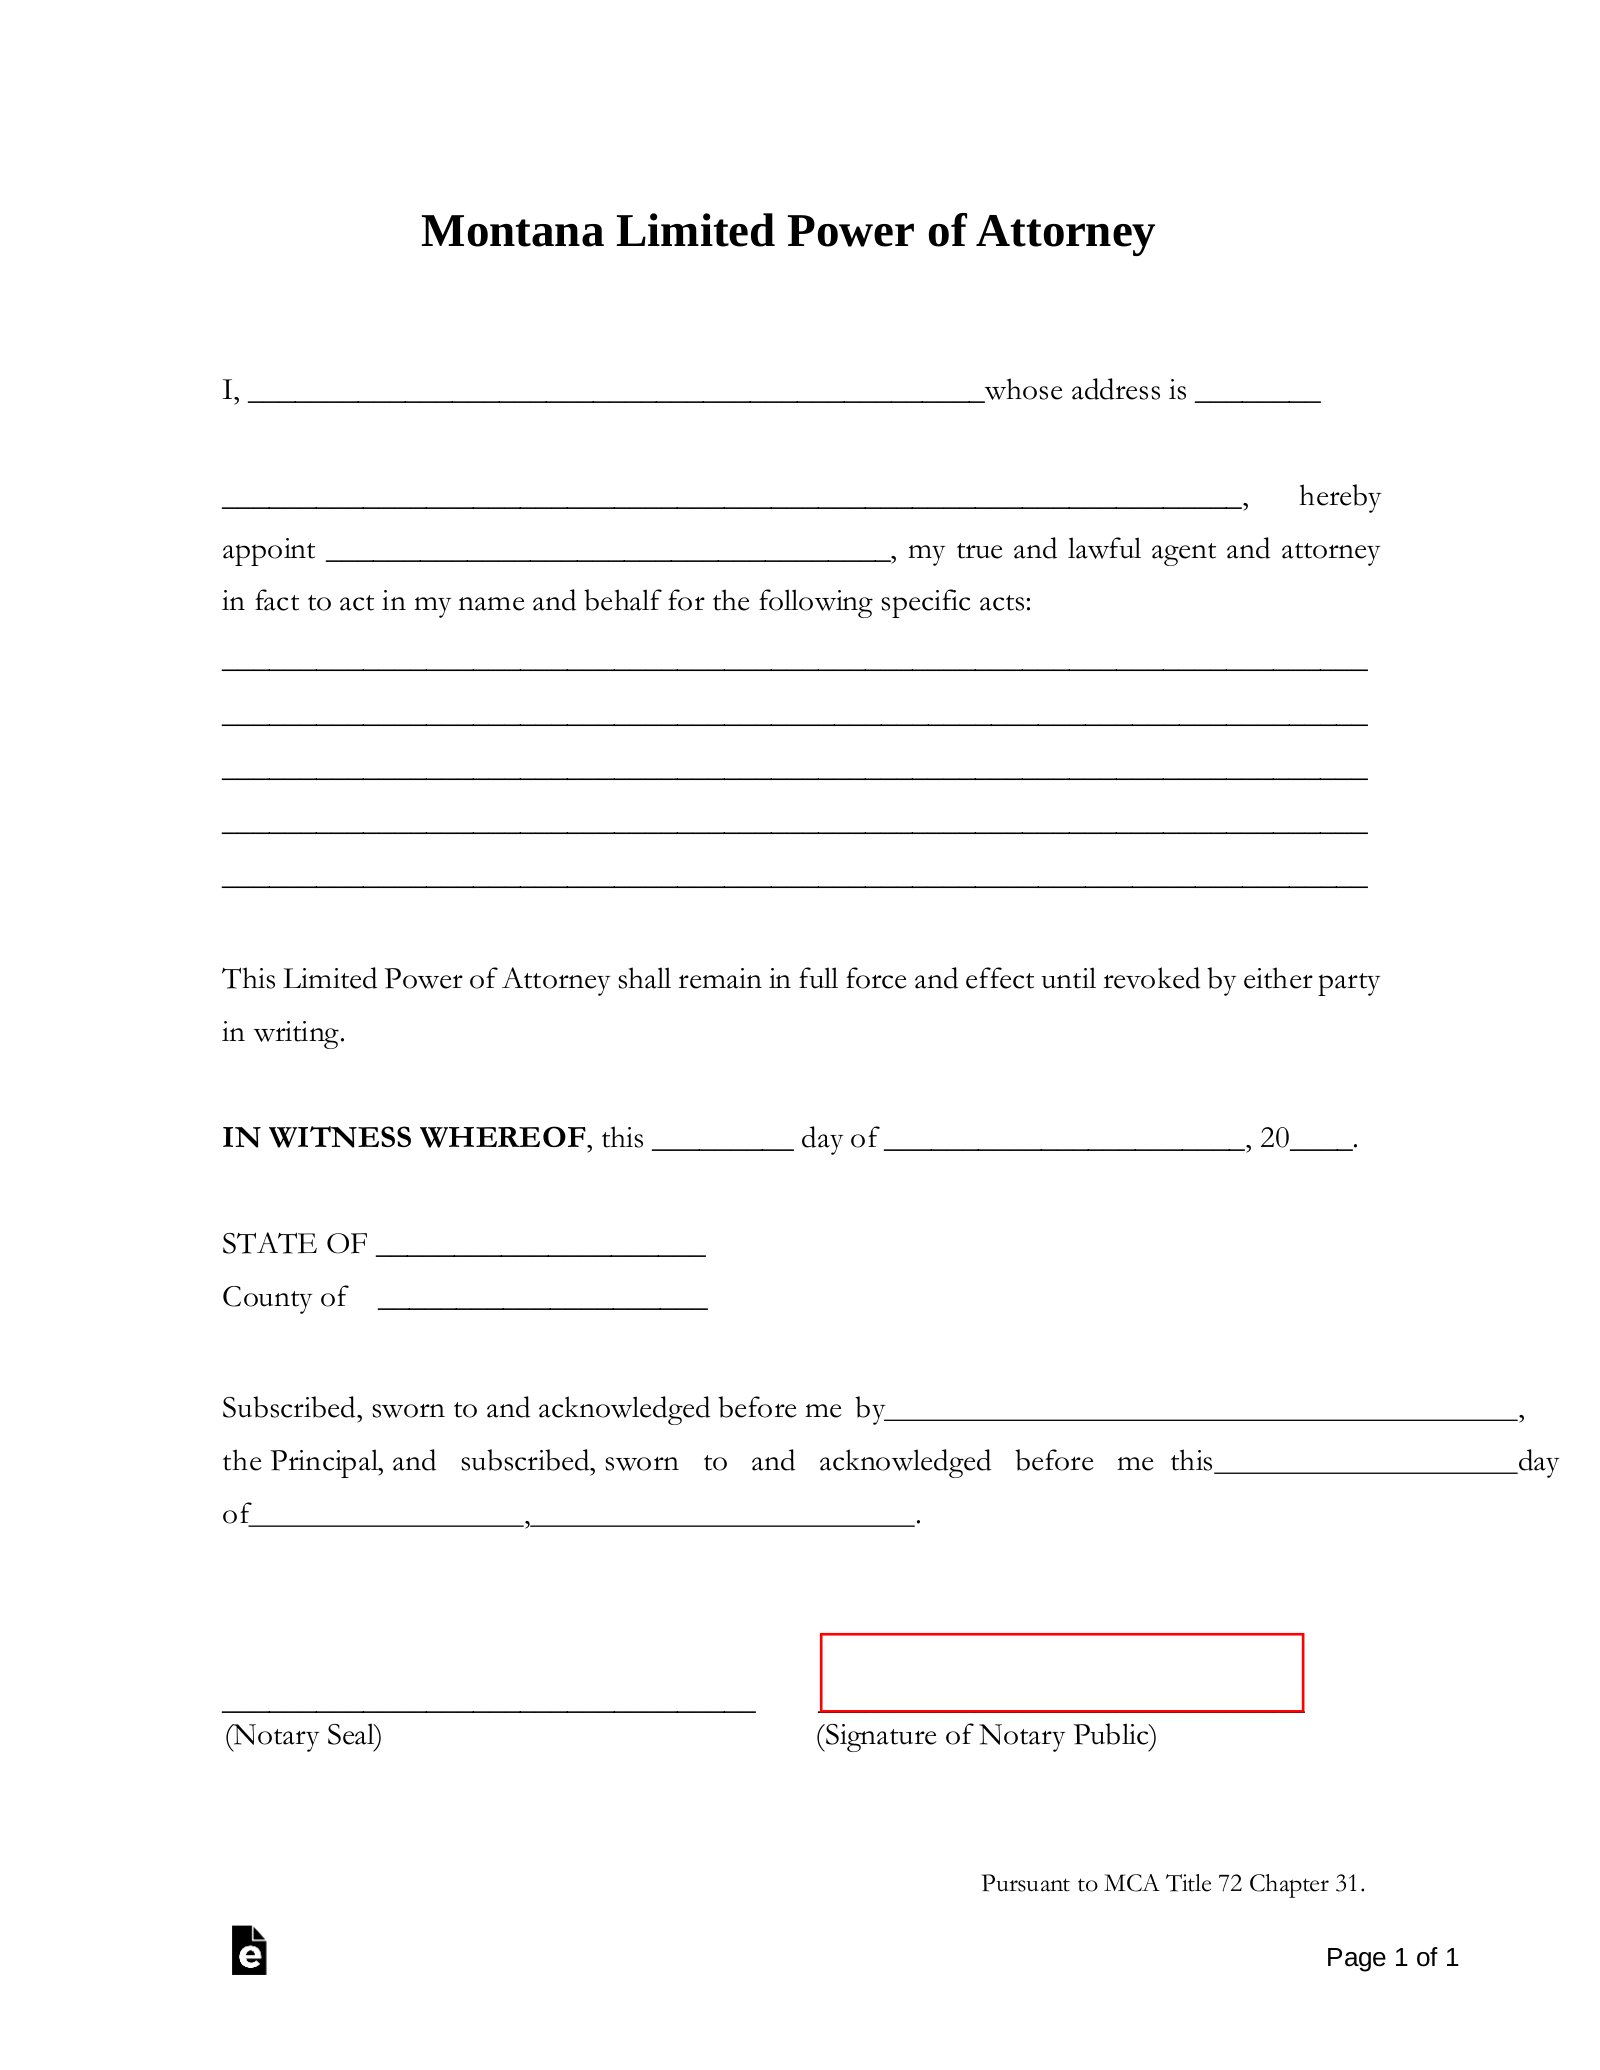 free-montana-limited-power-of-attorney-form-pdf-word-eforms